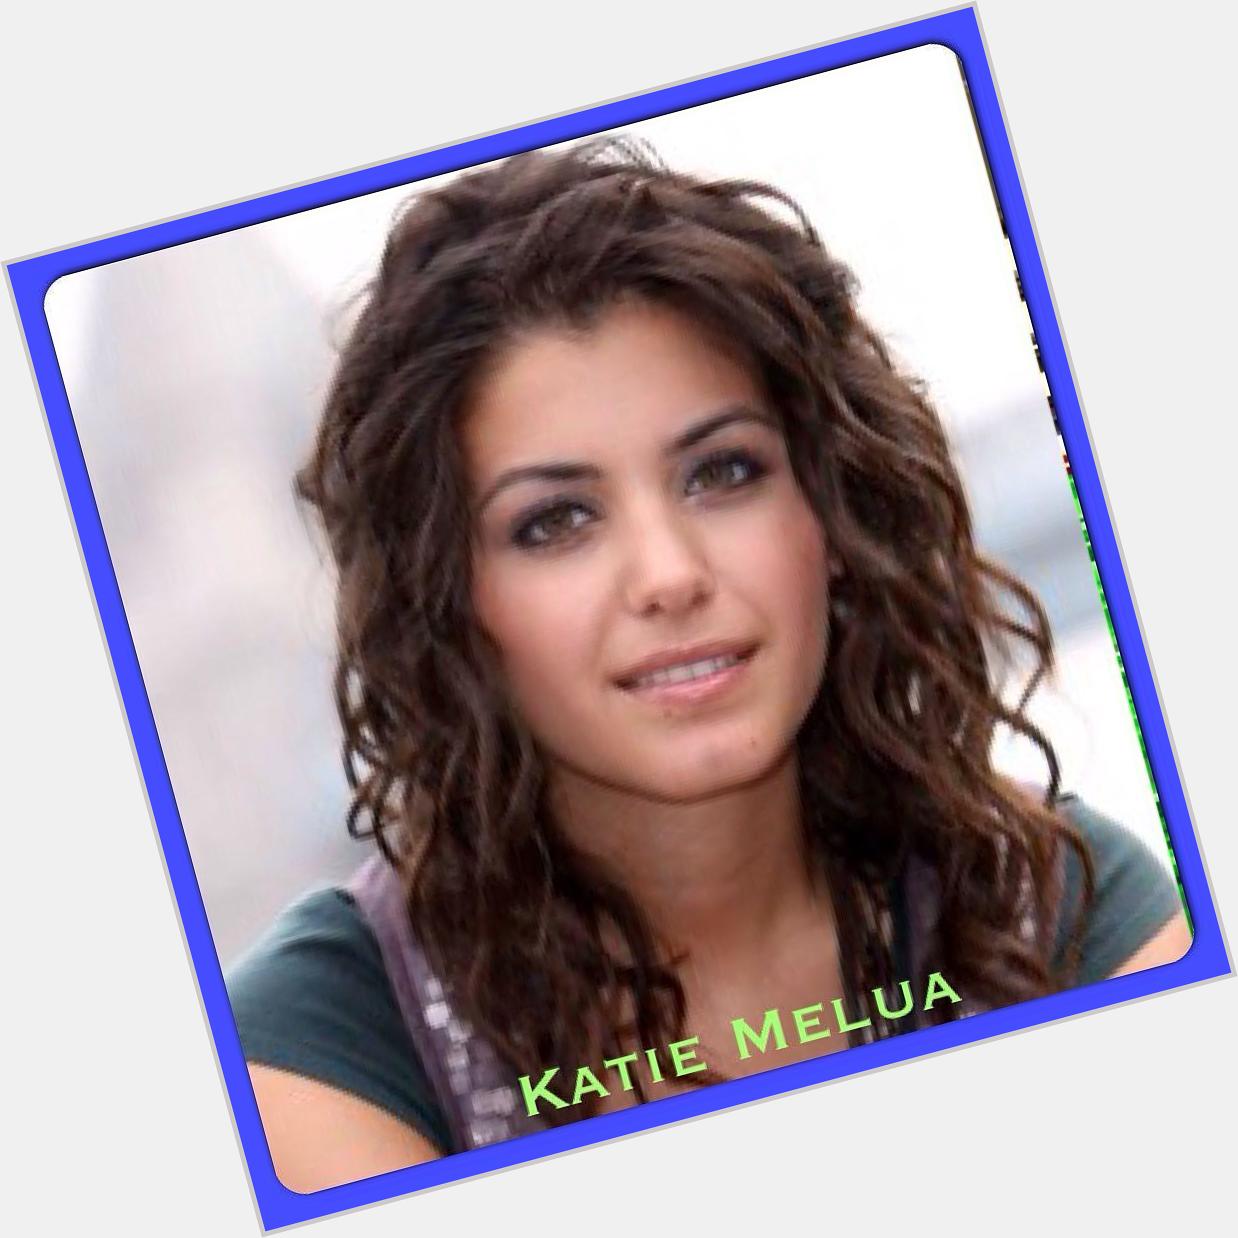  :  | And happy birthday to singer songwriter 
Katie Melua 
31 today (September 